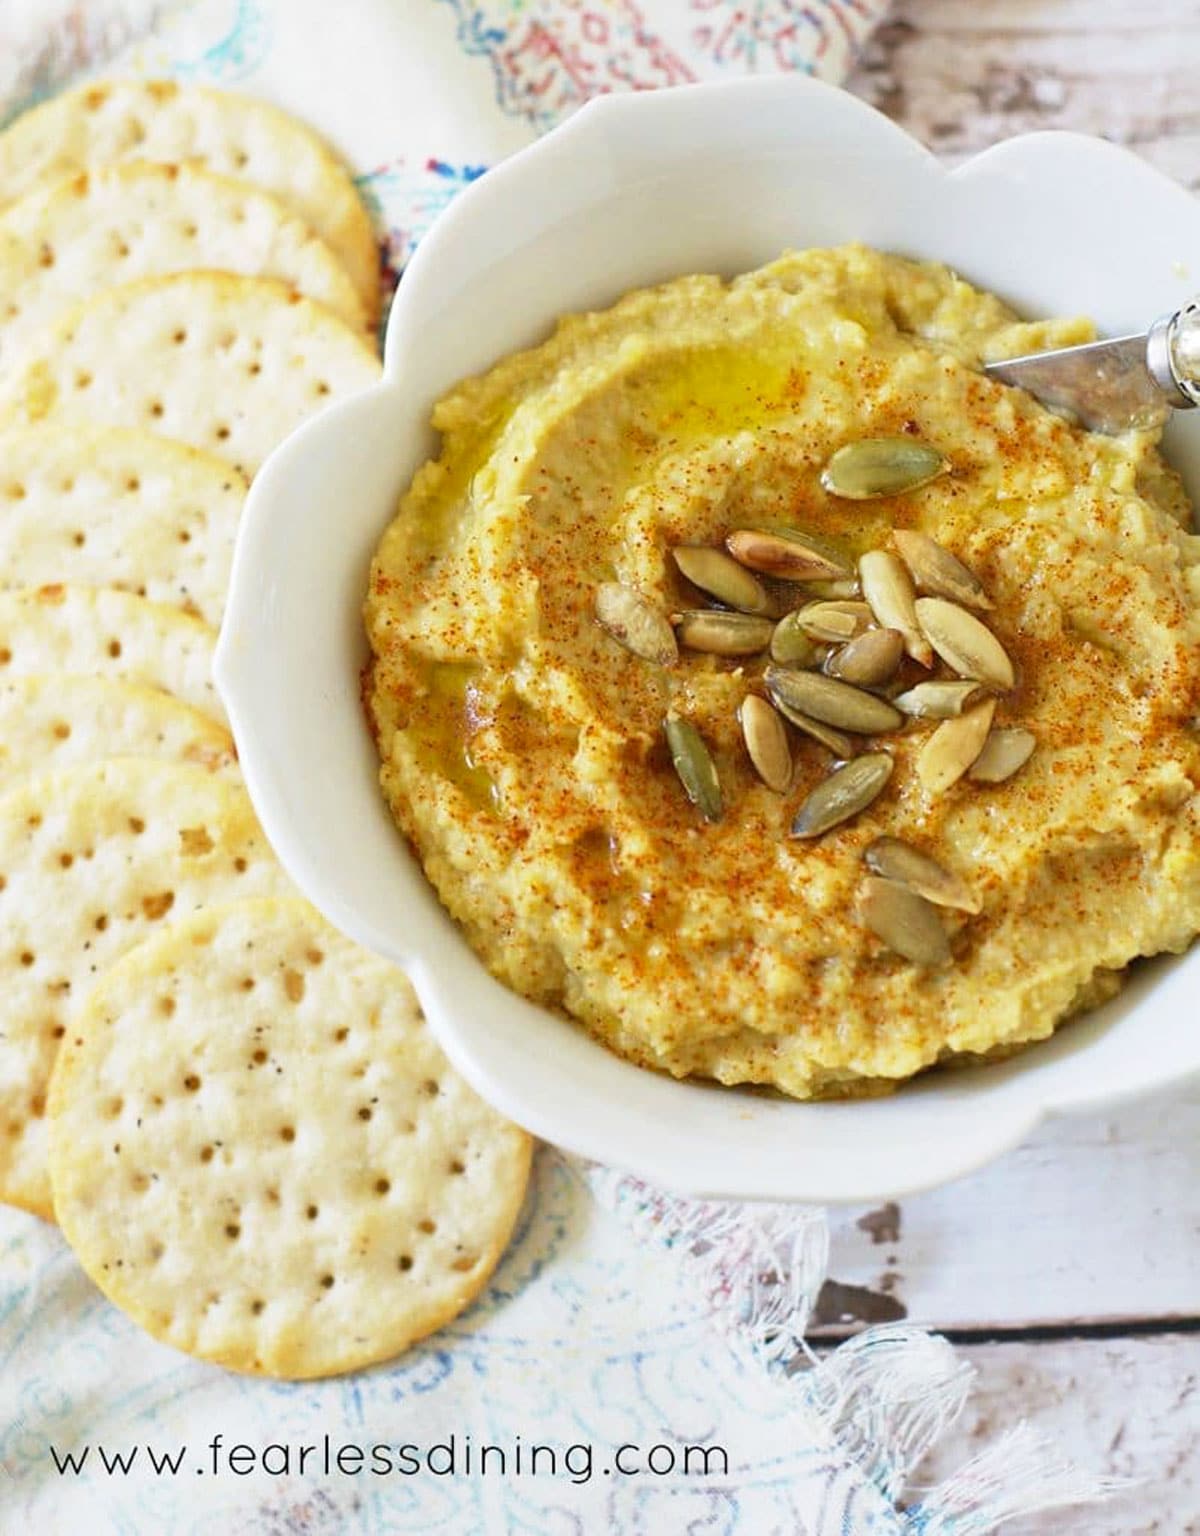 Another shot of the bowl of hatch chili hummus next to crackers.